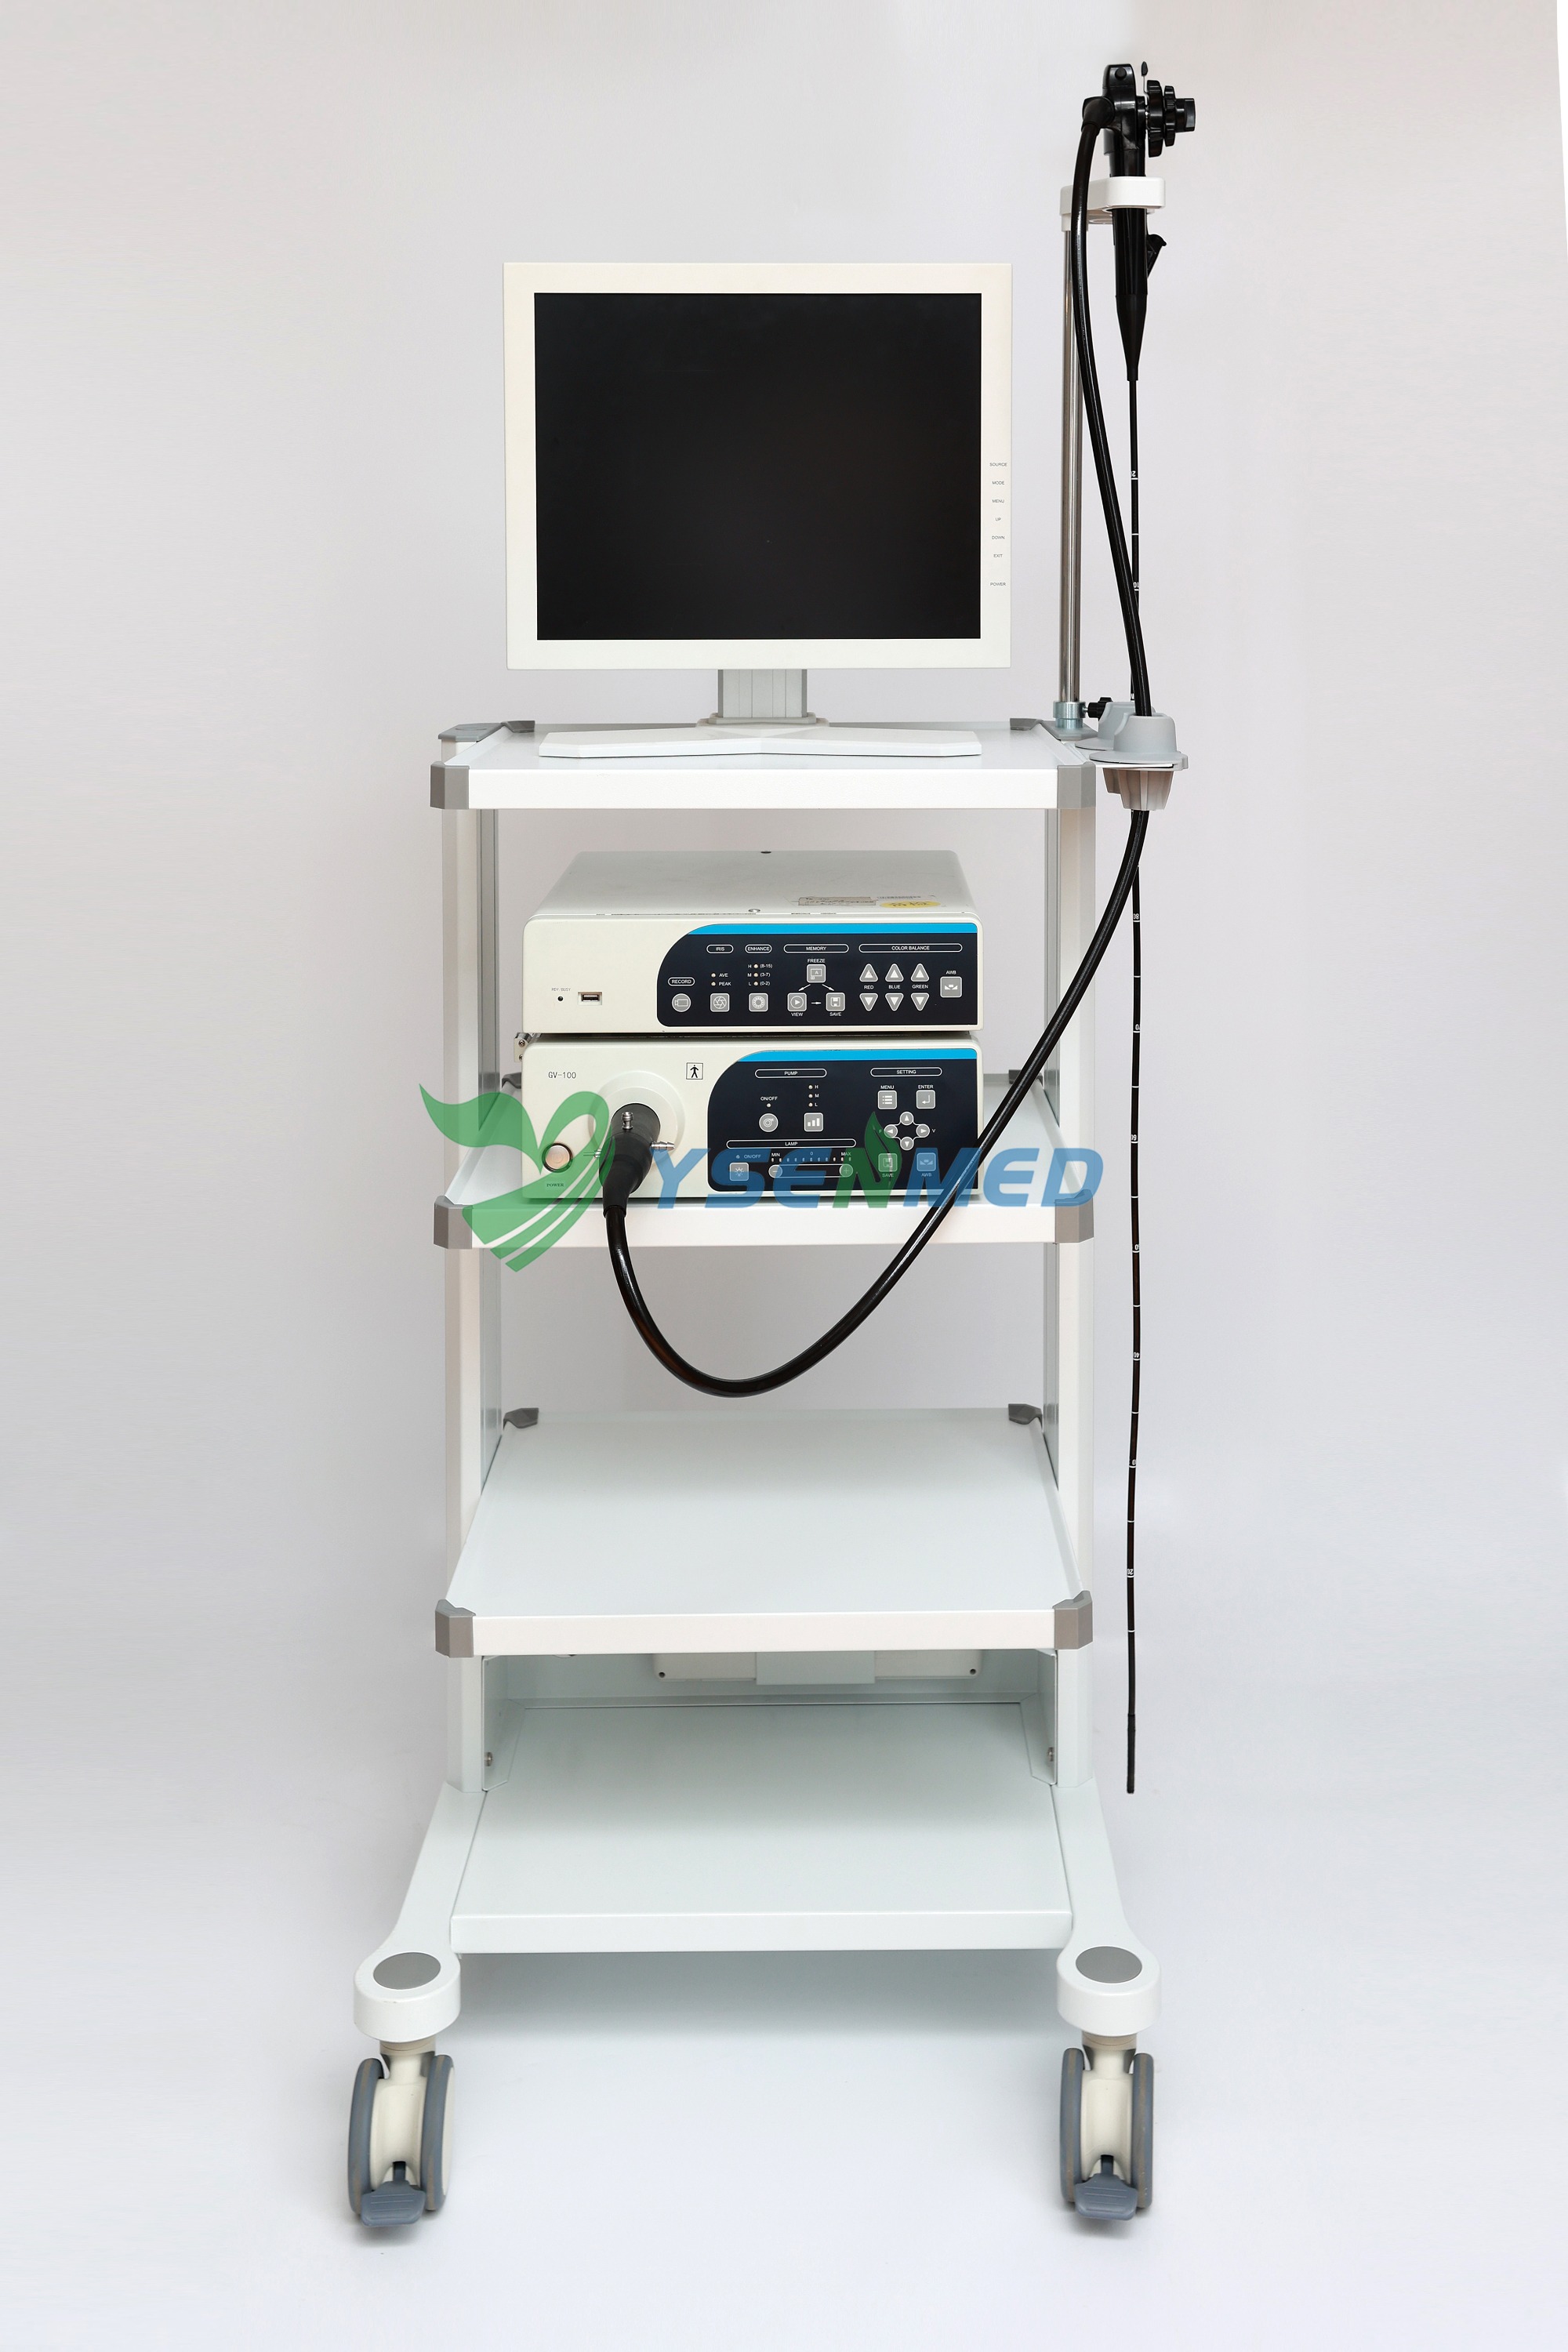 YSVME-200 HD video endoscope system is the bes-seller among our endoscopes, due to its clear imaging performance and fair rate.